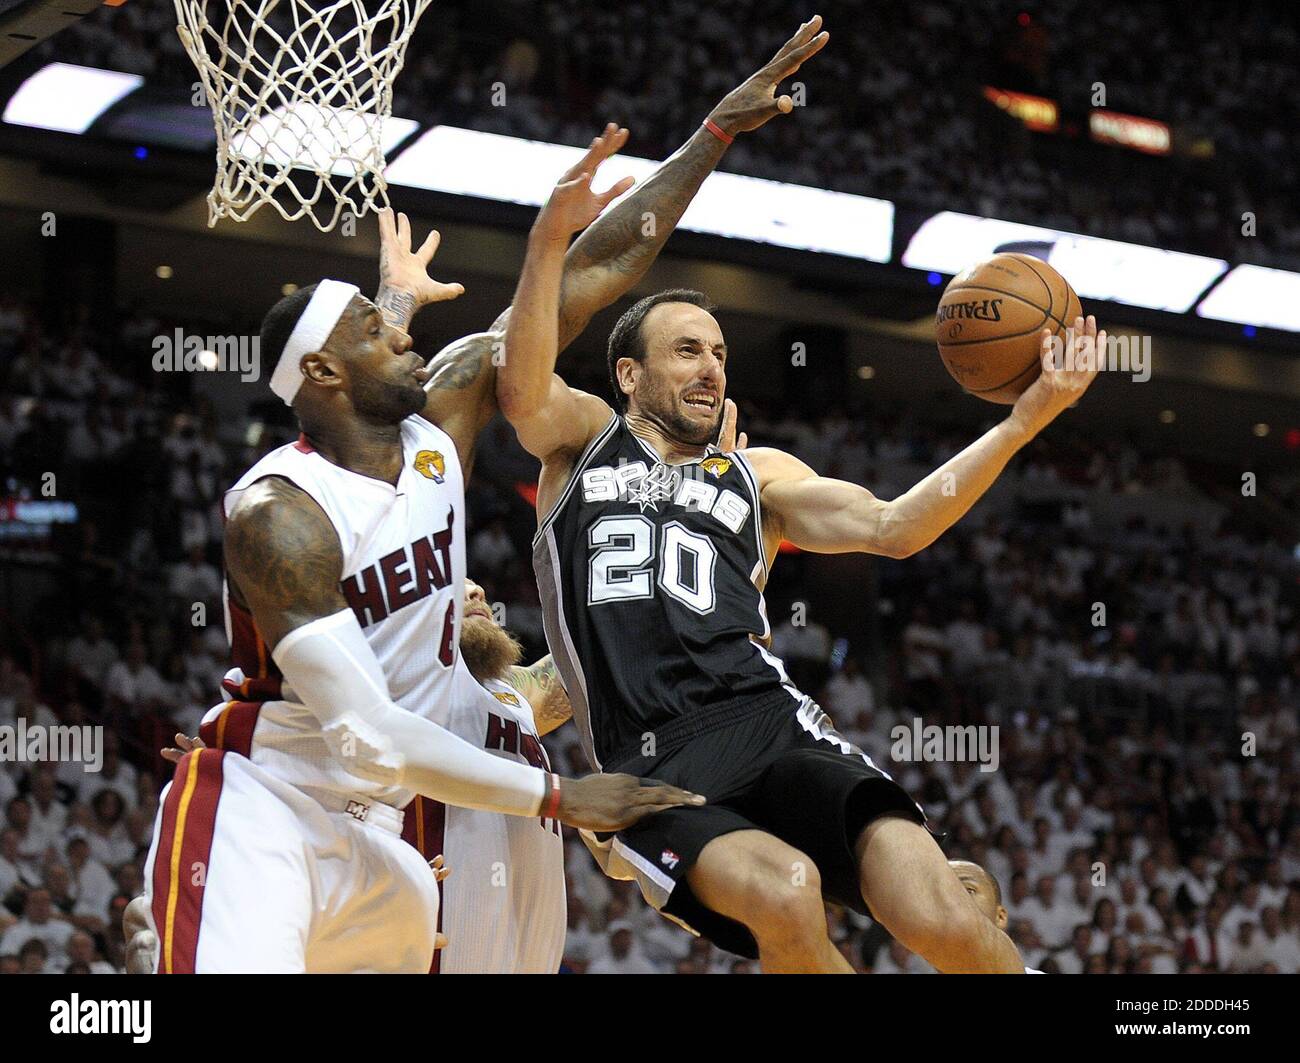 NO FILM, NO VIDEO, NO TV, NO DOCUMENTARY - Miami Heat forward LeBron James defends San Antonio Spurs guard Manu Ginobili during the first half in Game 3 of the NBA Finals at AmericanAirlines Arena in Miami, FL, USA on June 10, 2014. Photo by Michael Laughlin/Sun Sentinel/MCT/ABACAPRESS.COM Stock Photo